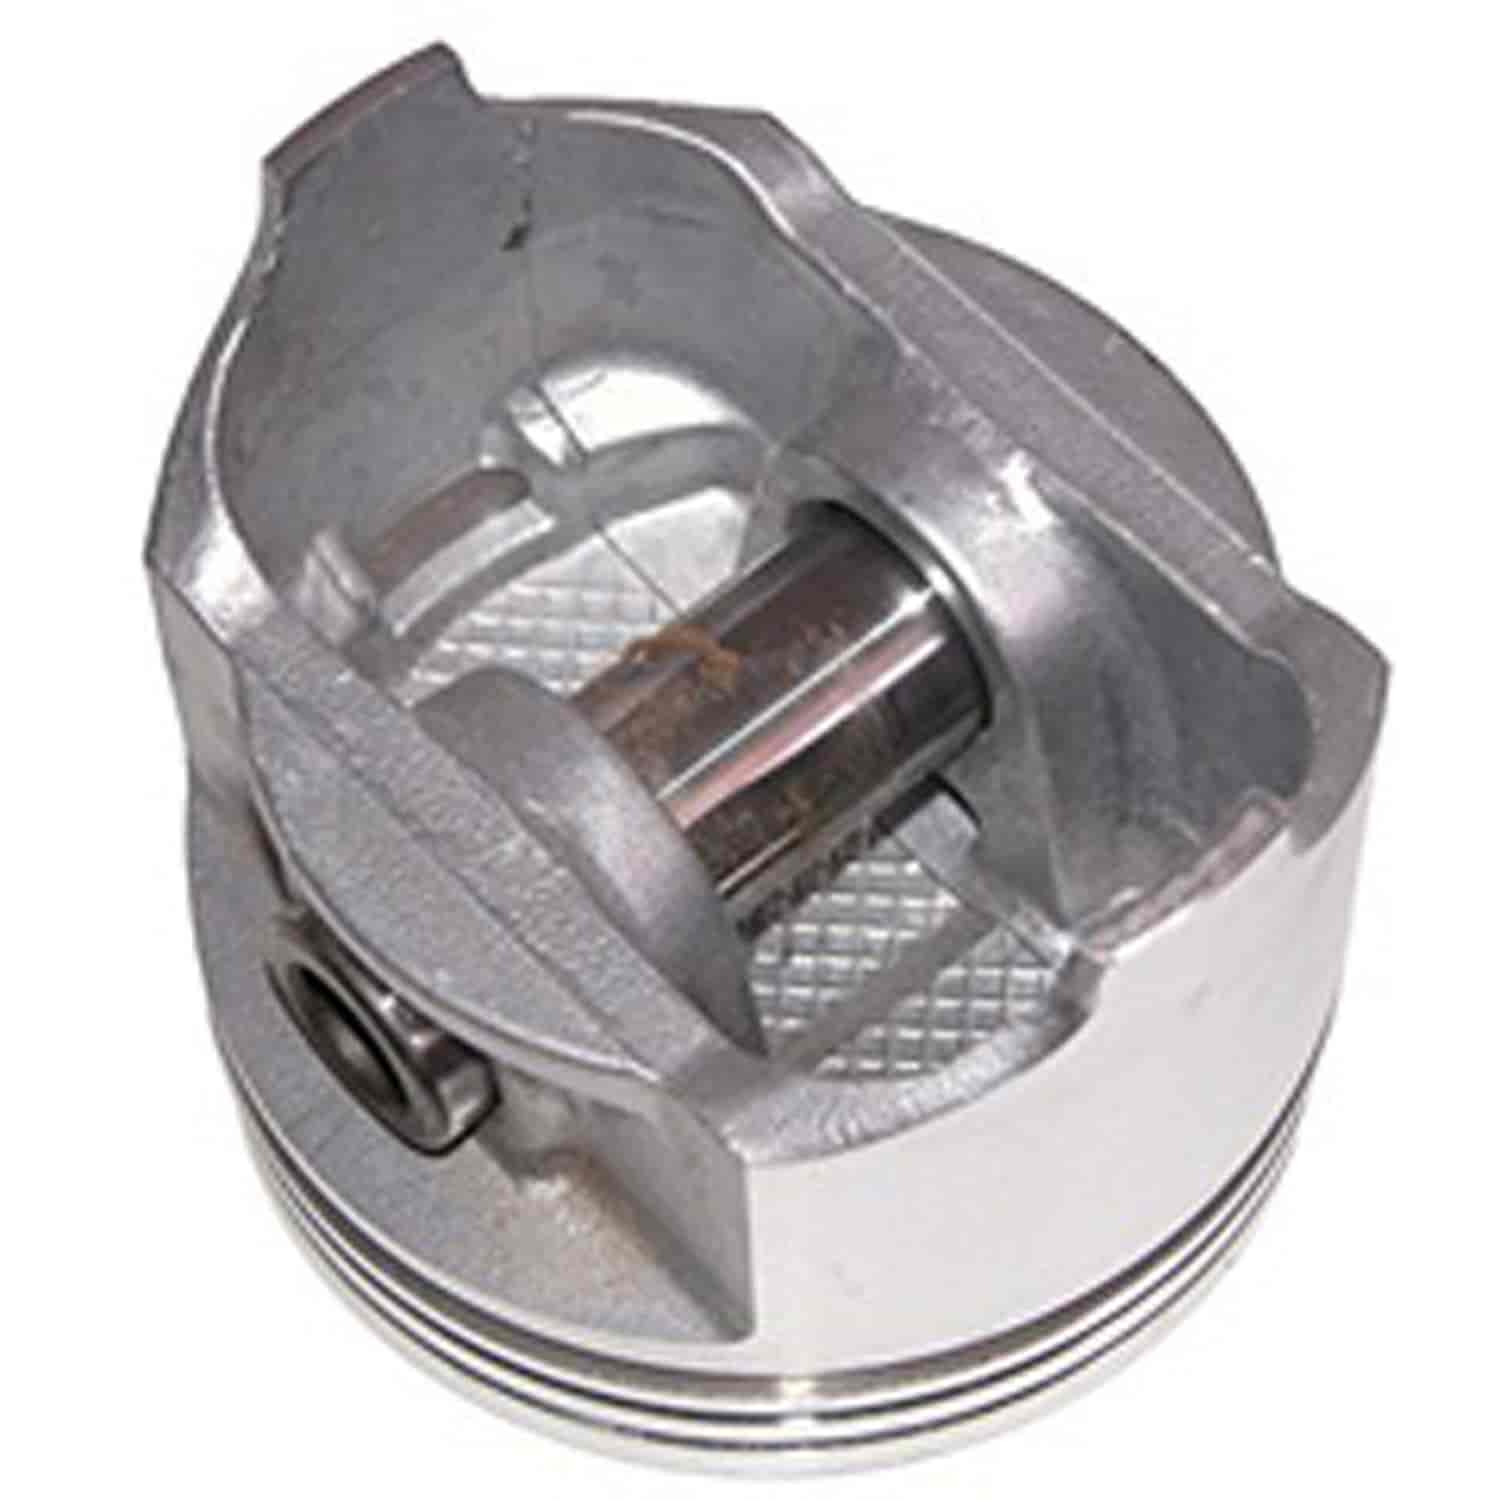 This standard piston from Omix-ADA fits the 5.9L engine used in 70-91 Jeep SJ models.